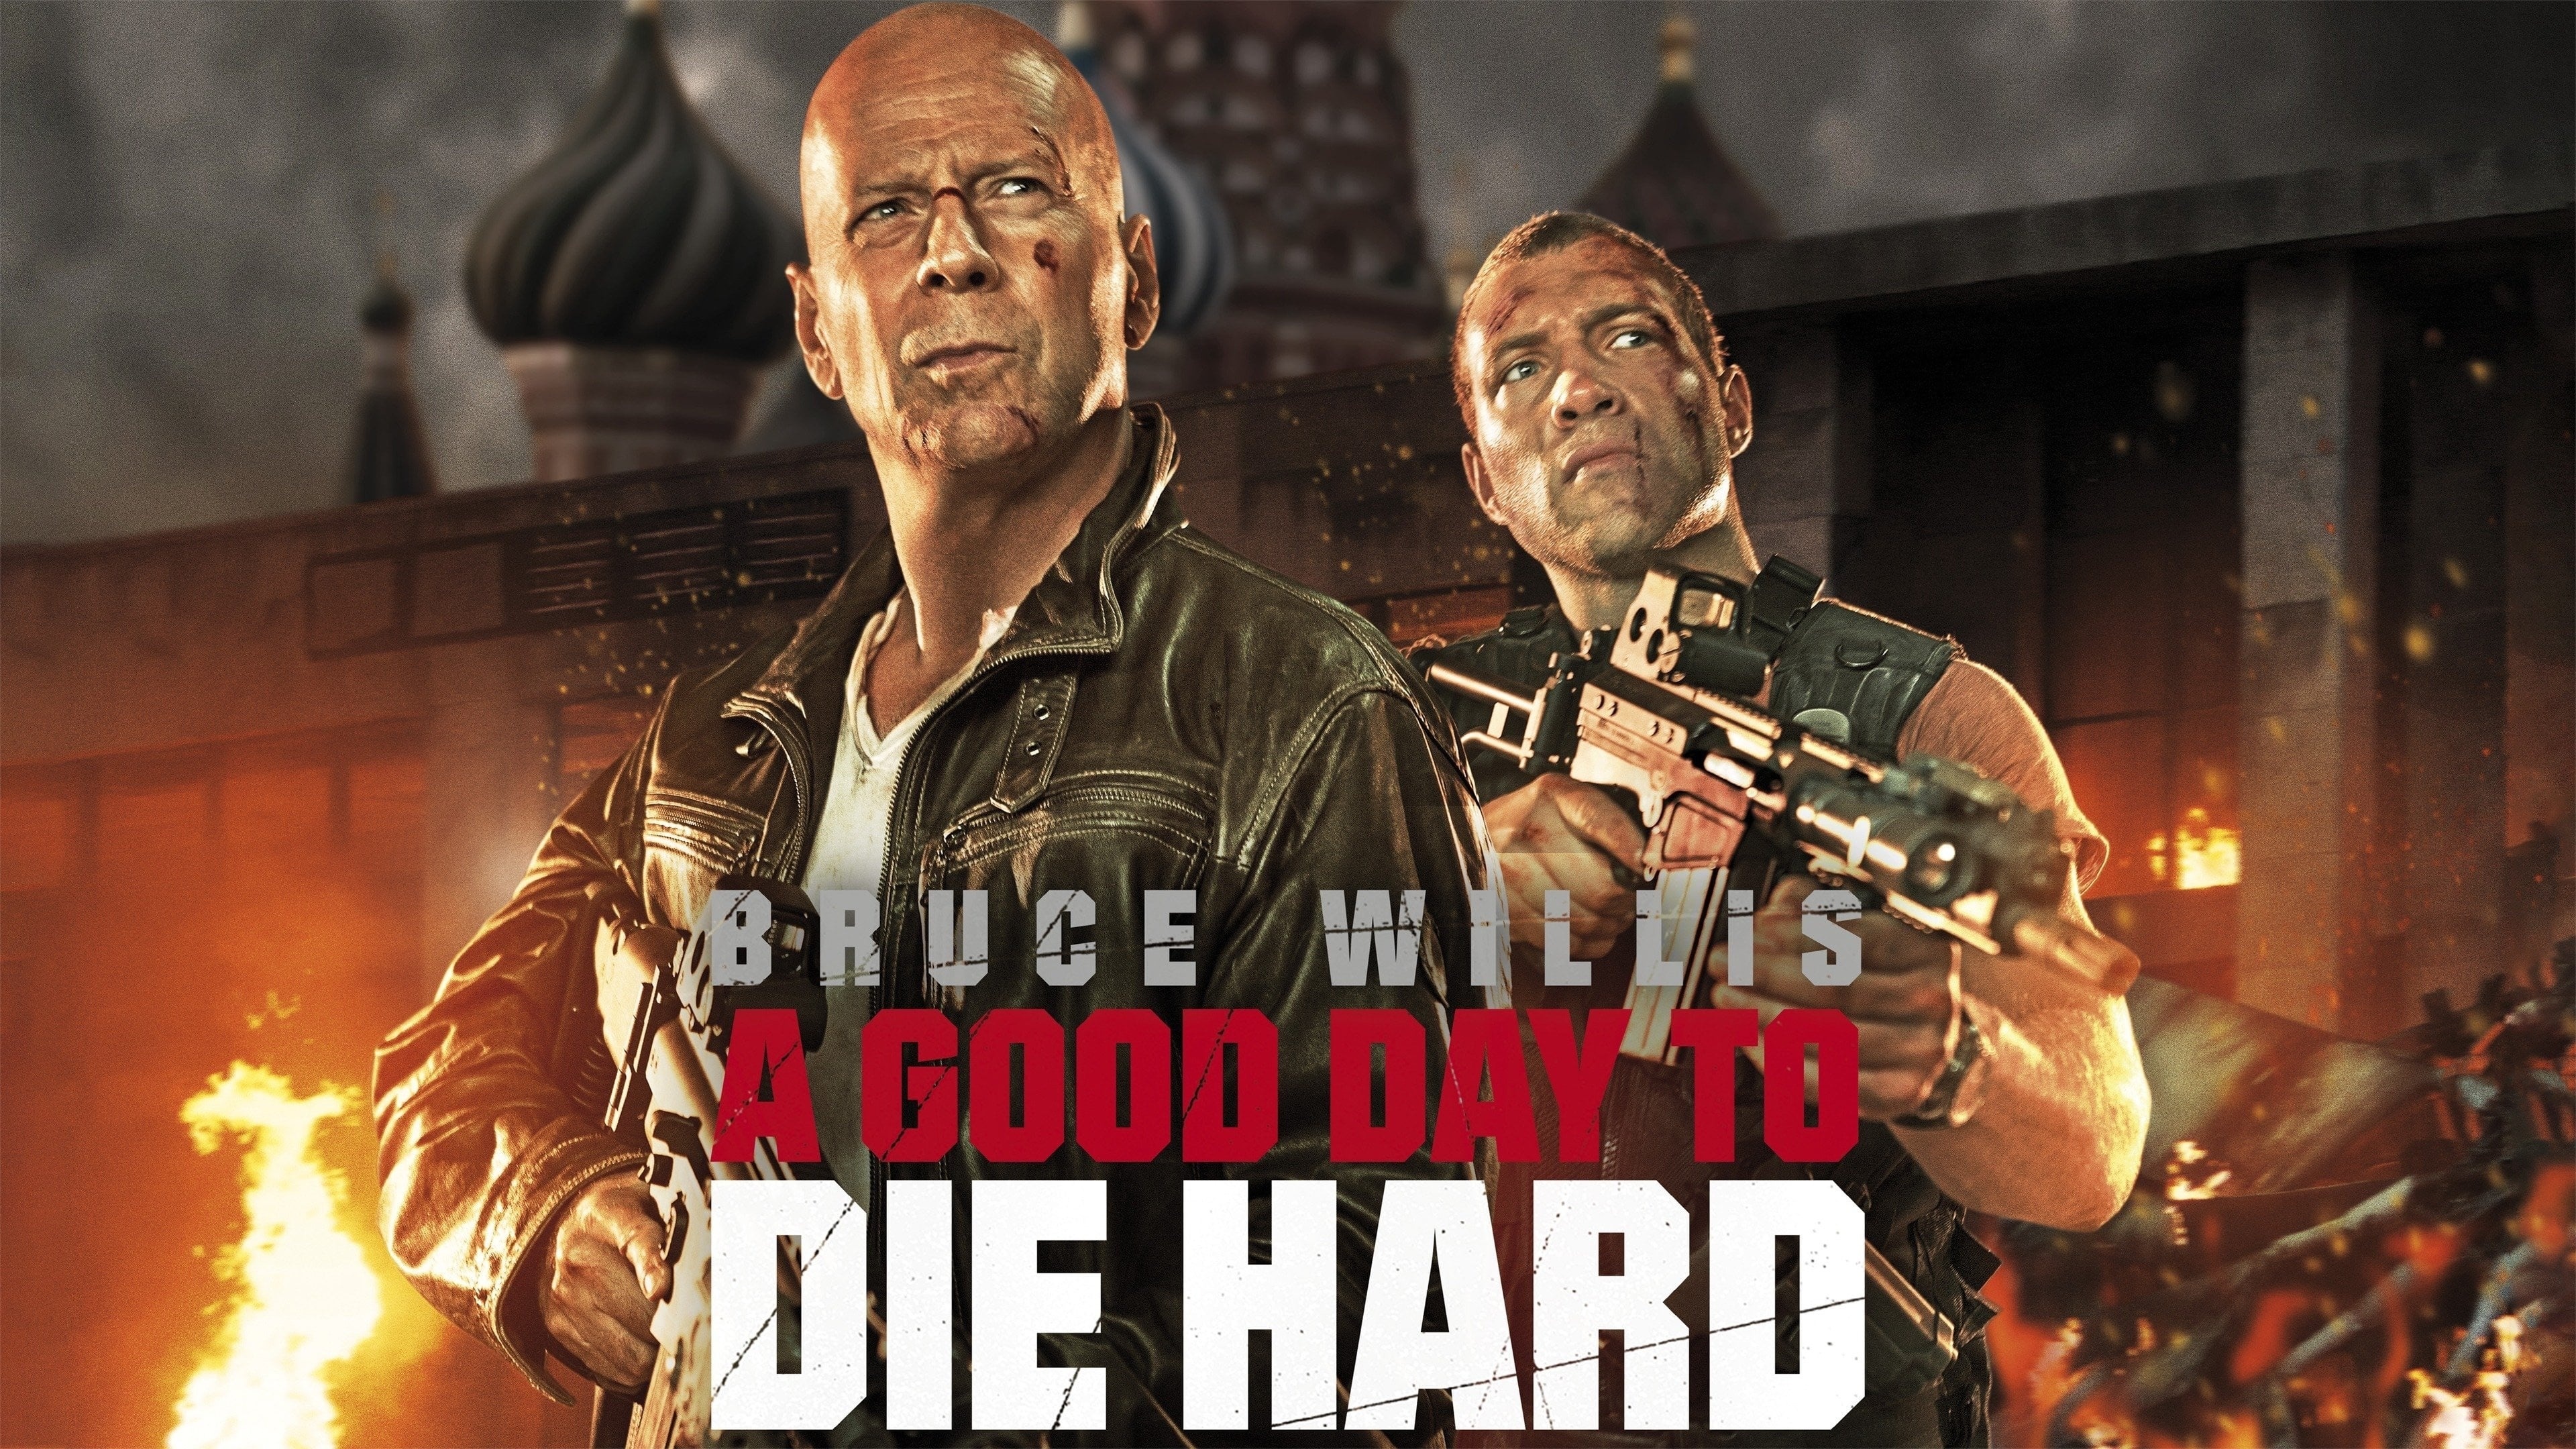 Live Free or Die Hard, Action-packed, Thrilling ride, Unmissable, 3840x2160 4K Desktop